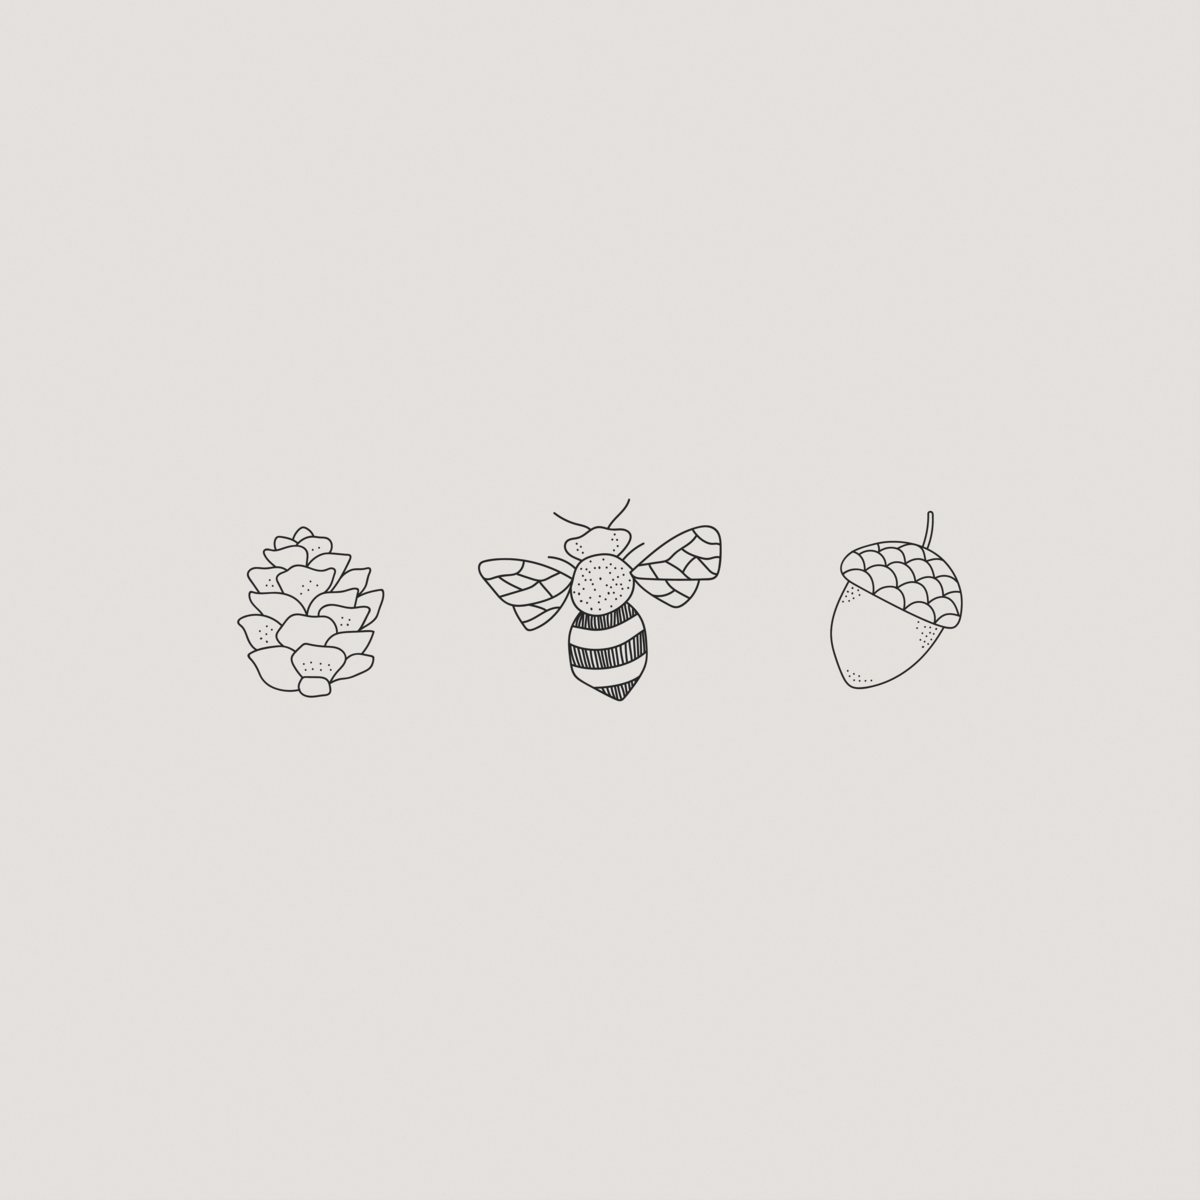 Brand icons for a British Candle Company